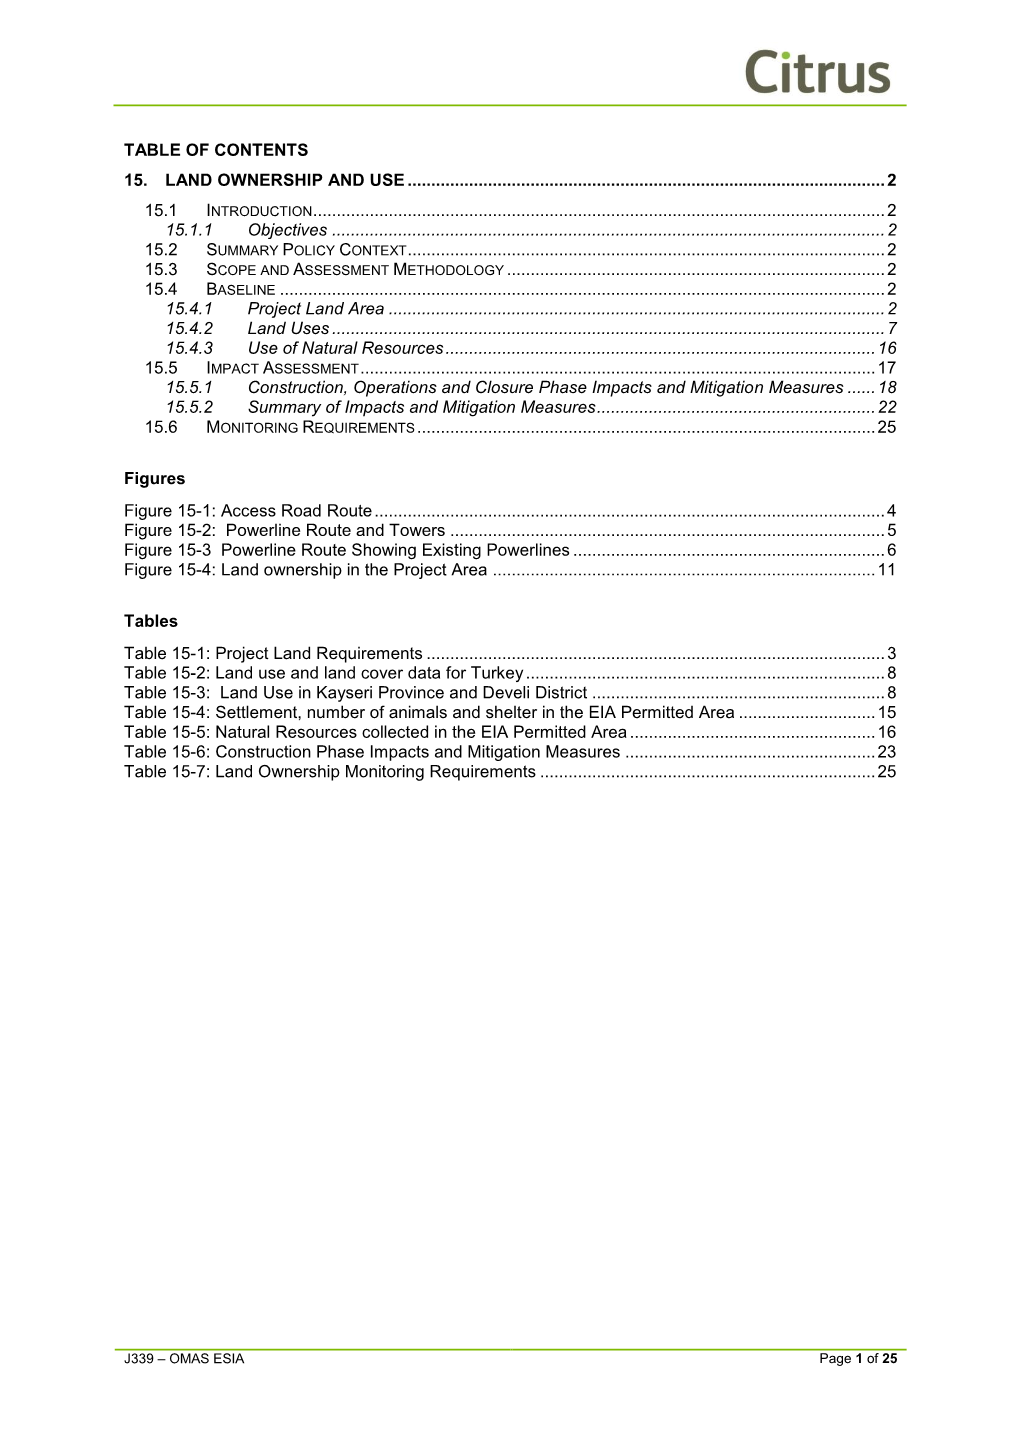 Table of Contents 15. Land Ownership and Use